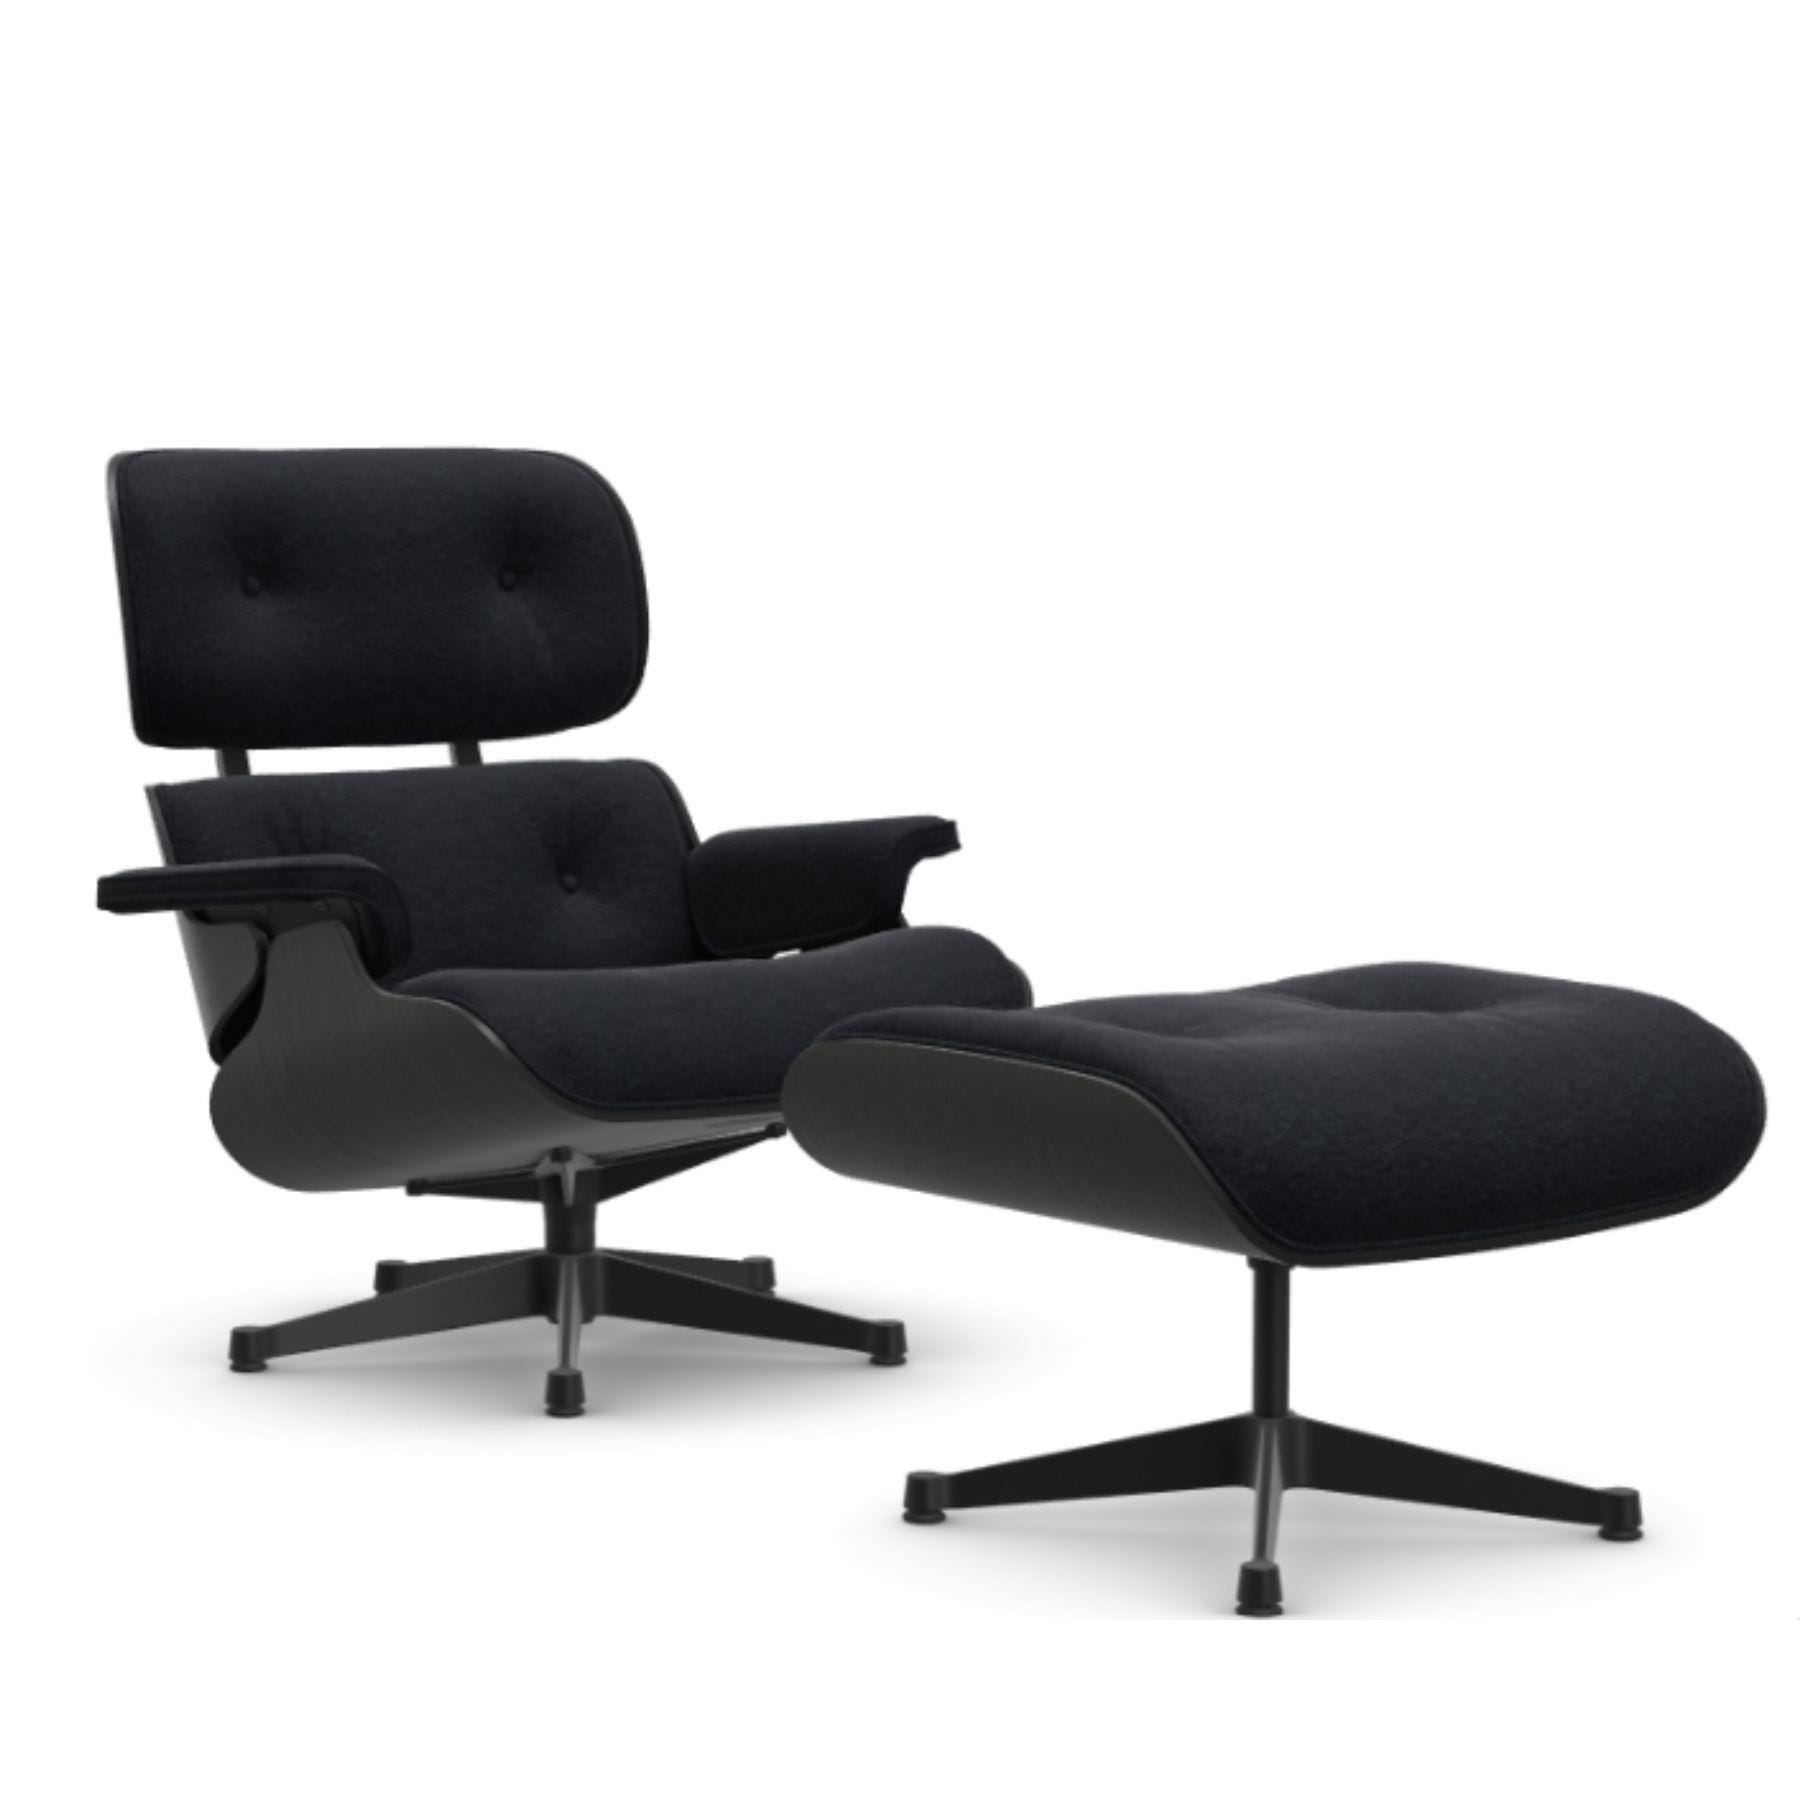 Vitra Eames Lounge Chair Black Ash Nubia Anthracite Black Polished Black With Ottoman Designer Furniture From Holloways Of Ludlow